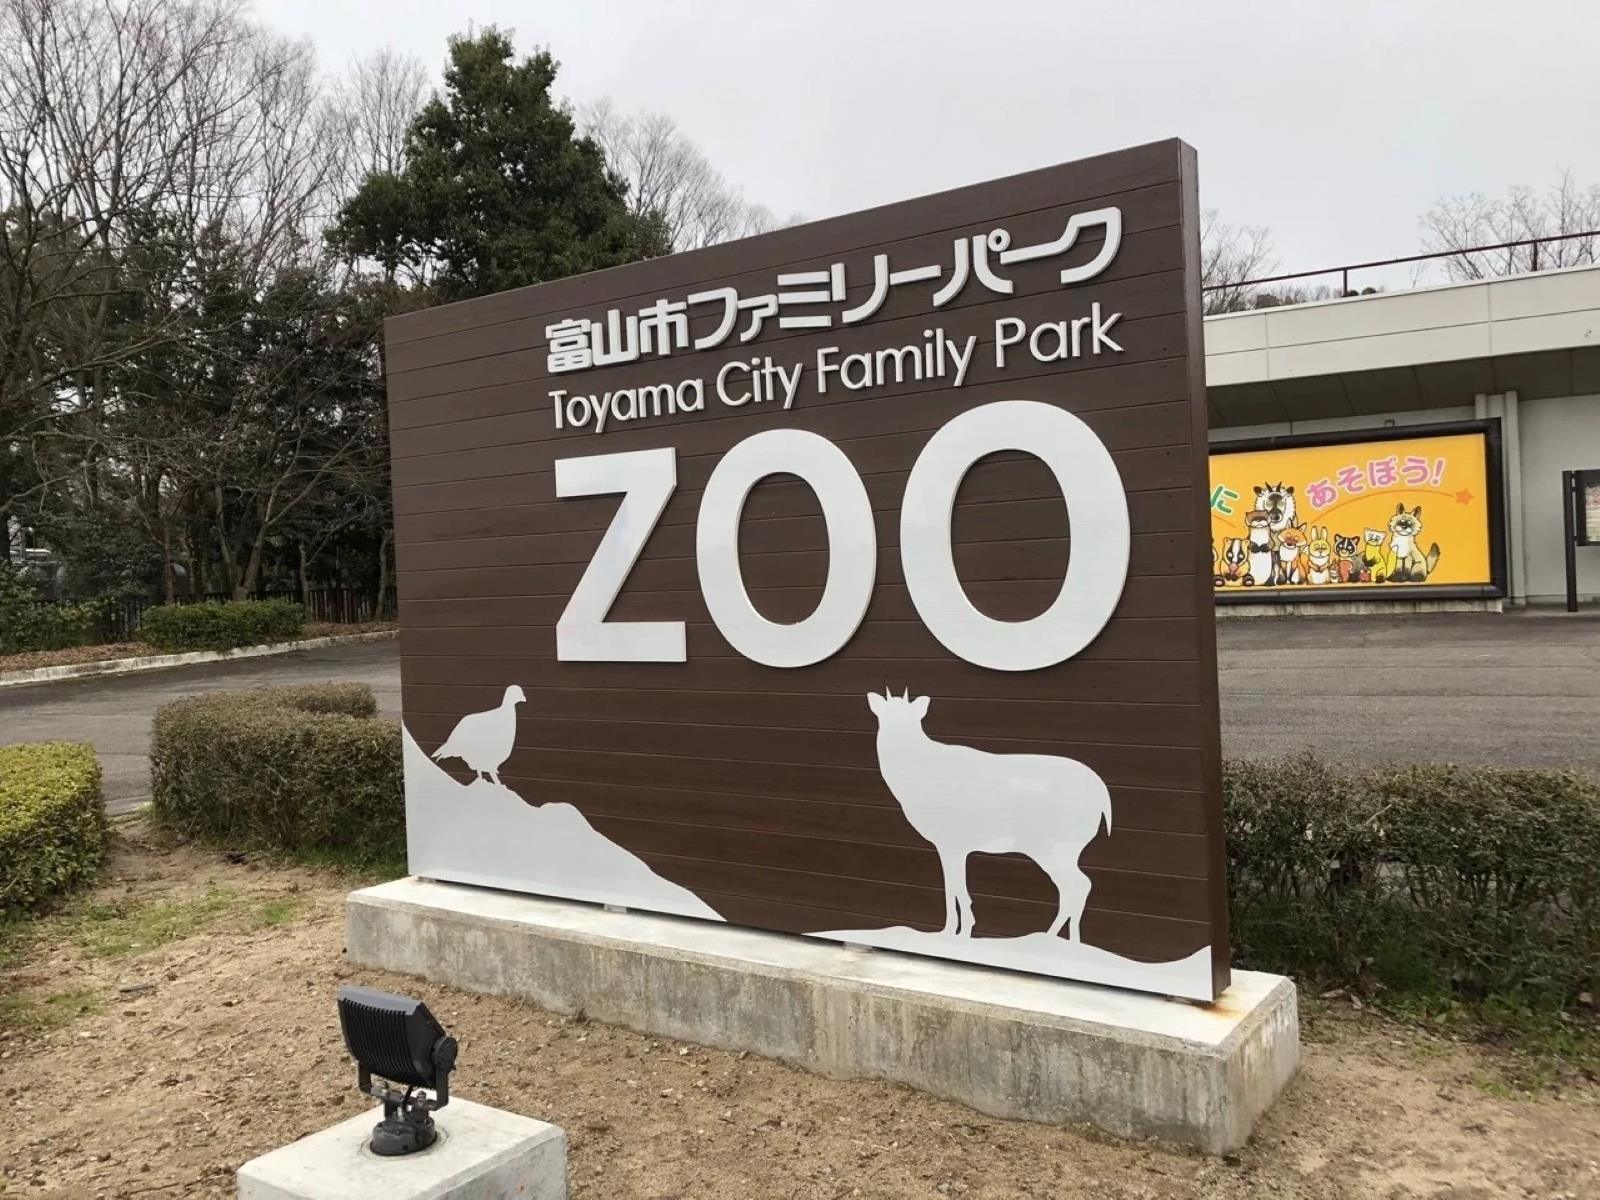 11-intriguing-facts-about-toyama-city-family-park